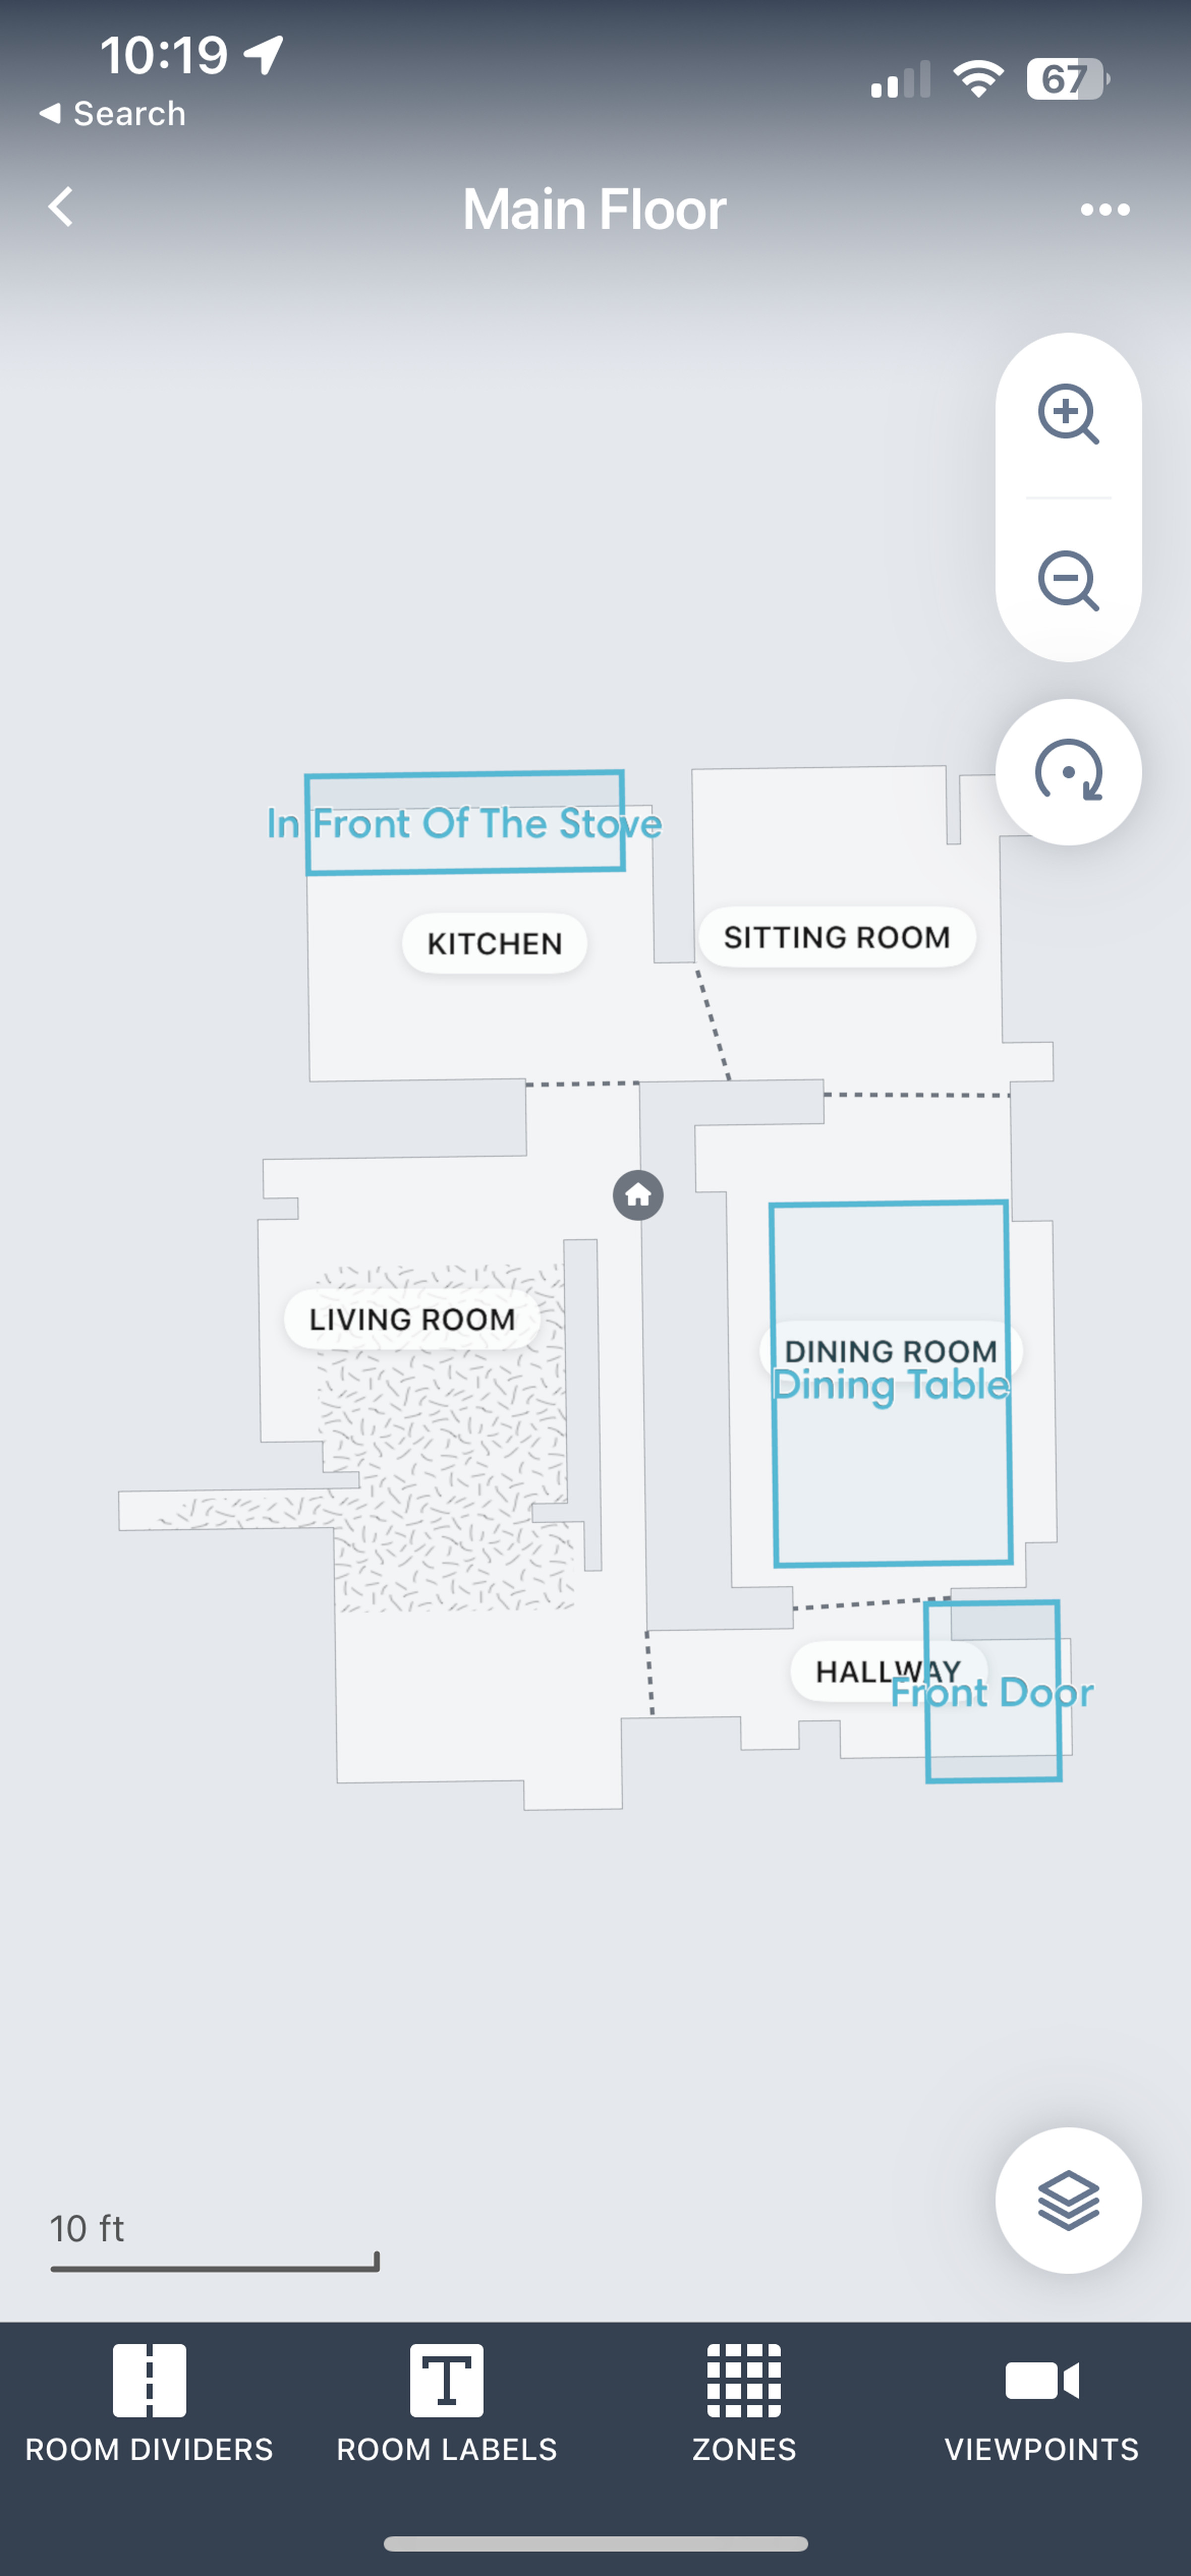 <em>Viewpoints appear on the robot vacuum’s map and only work if you have mapped your home.</em>